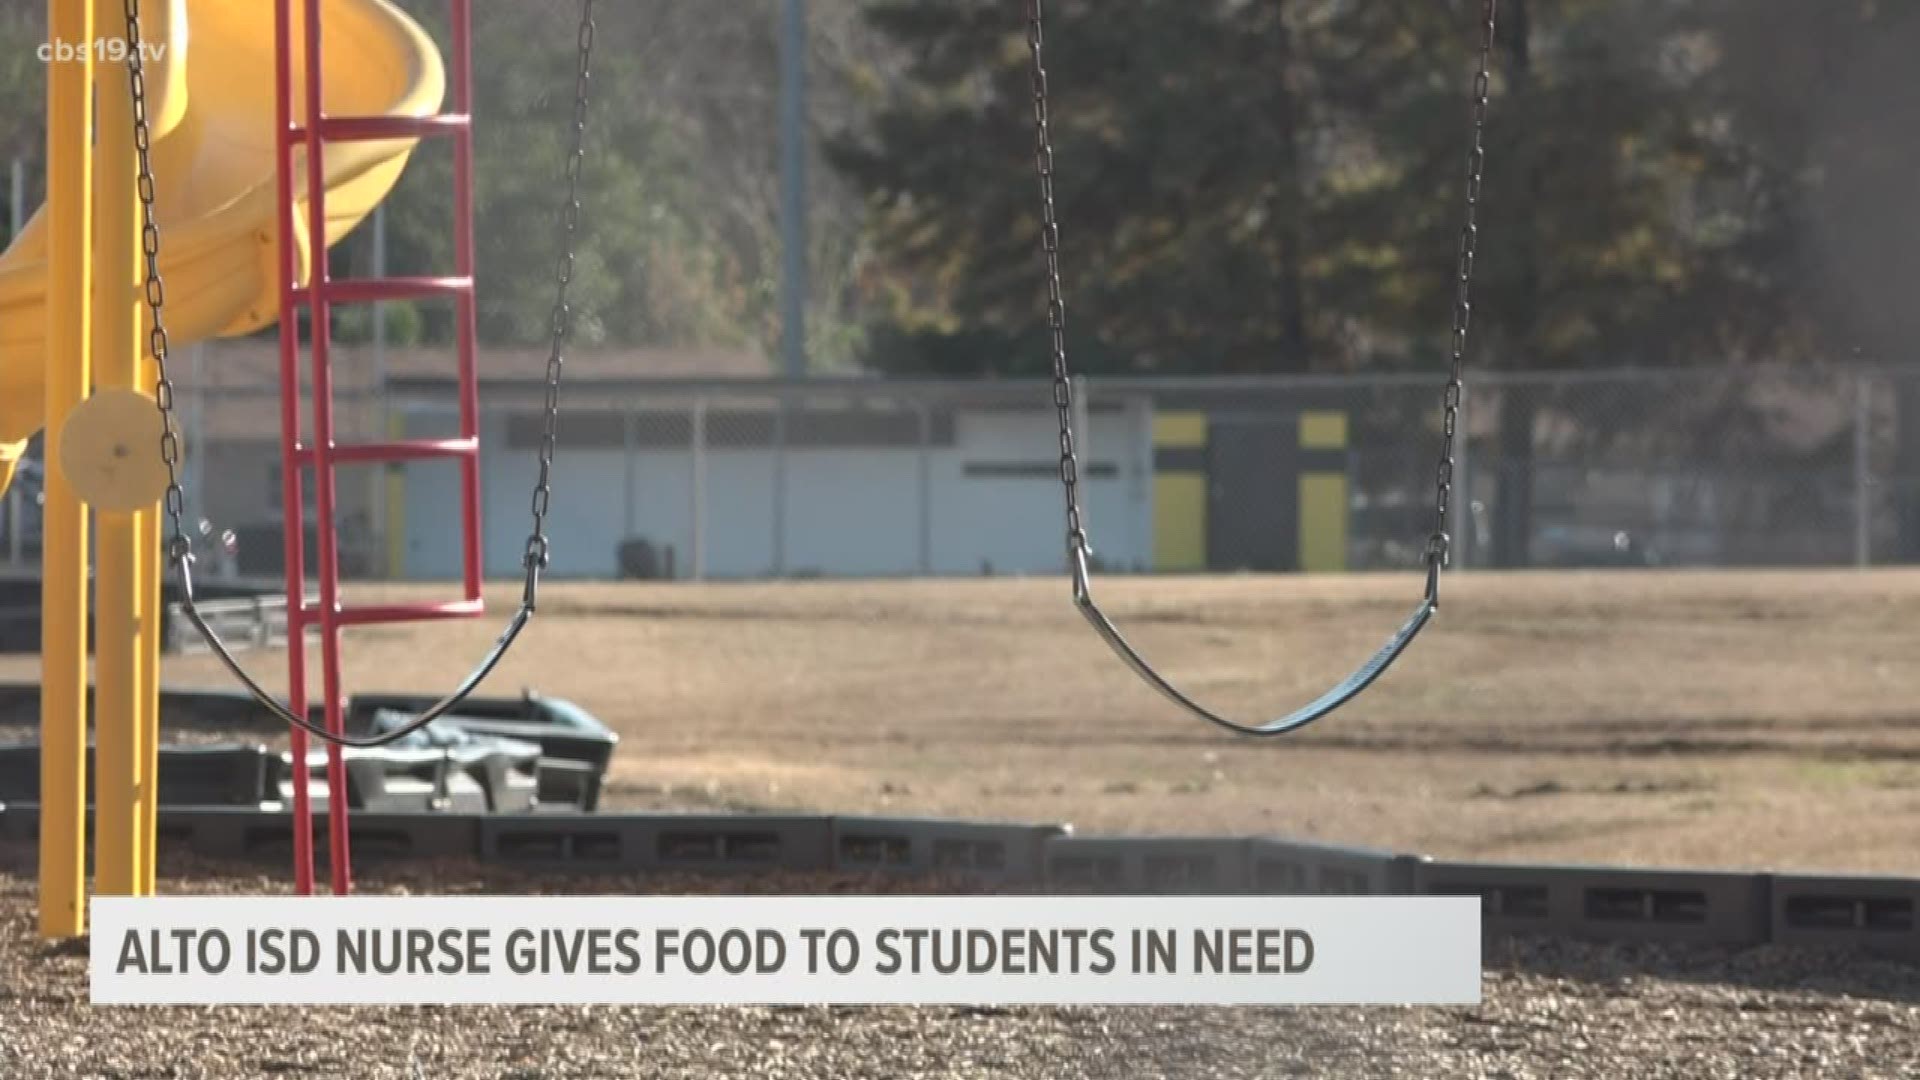 Alto ISD nurse gives food to students in need